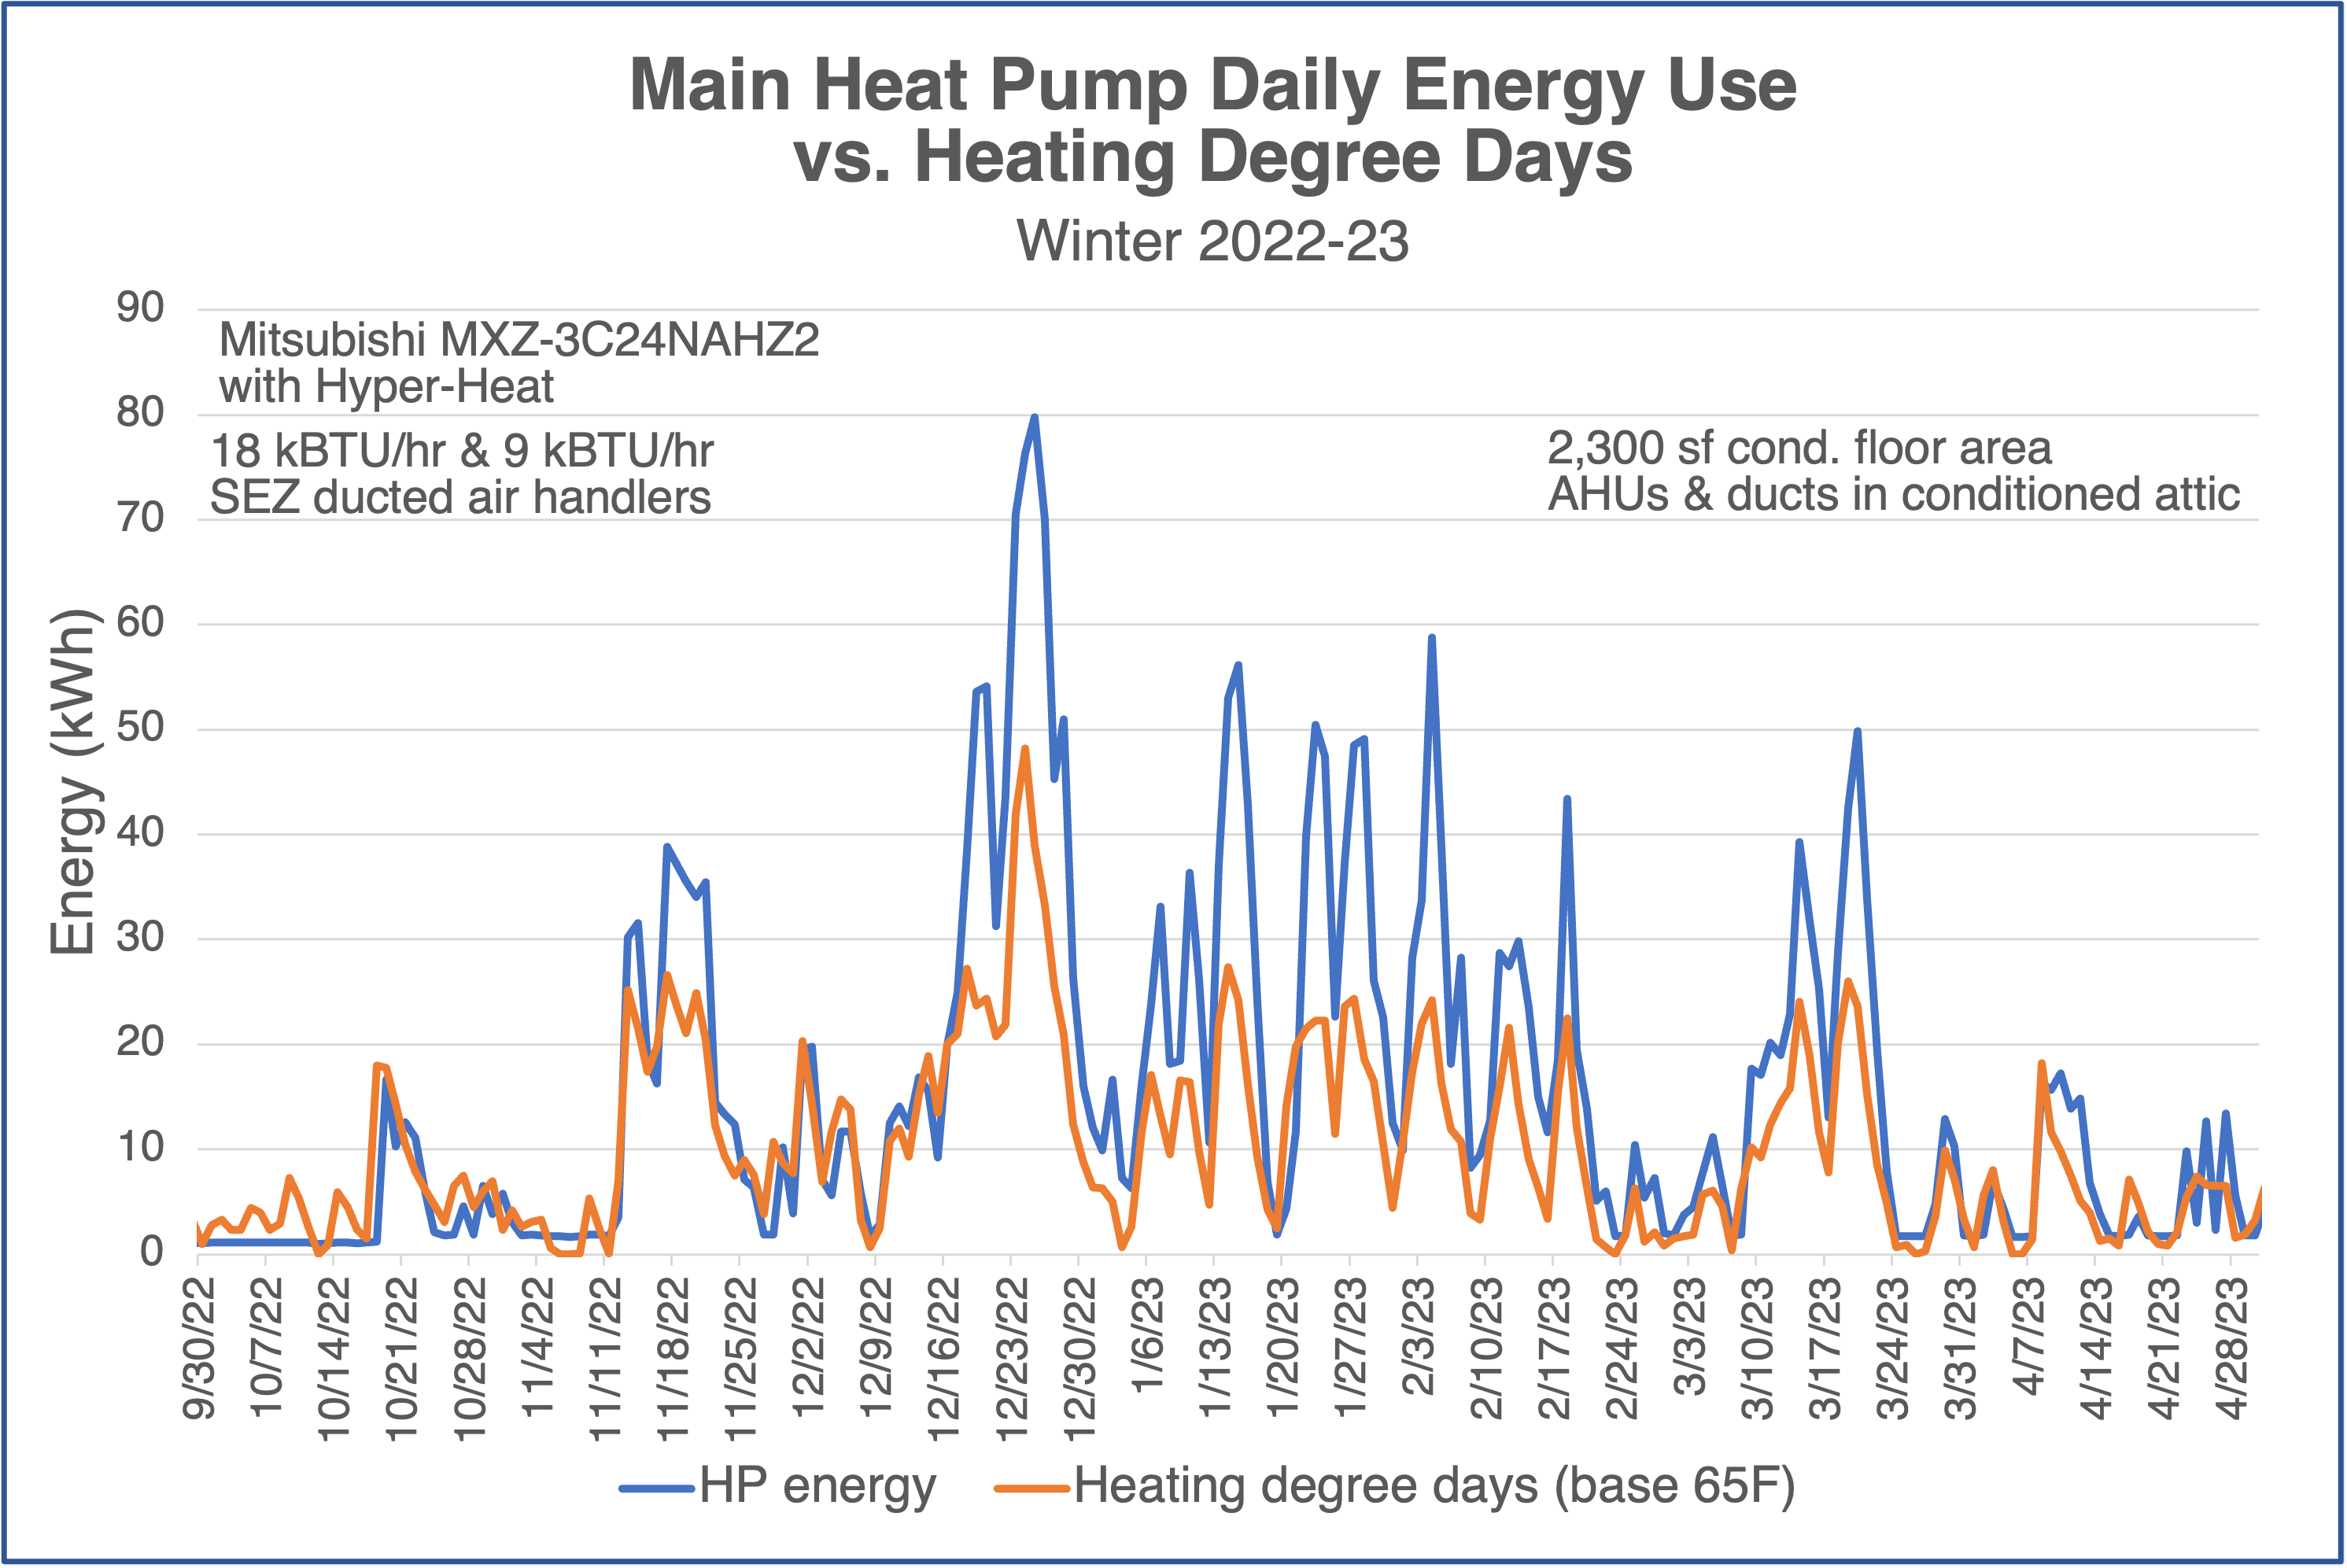 Main heat pump energy use in winter compared to heating degree days